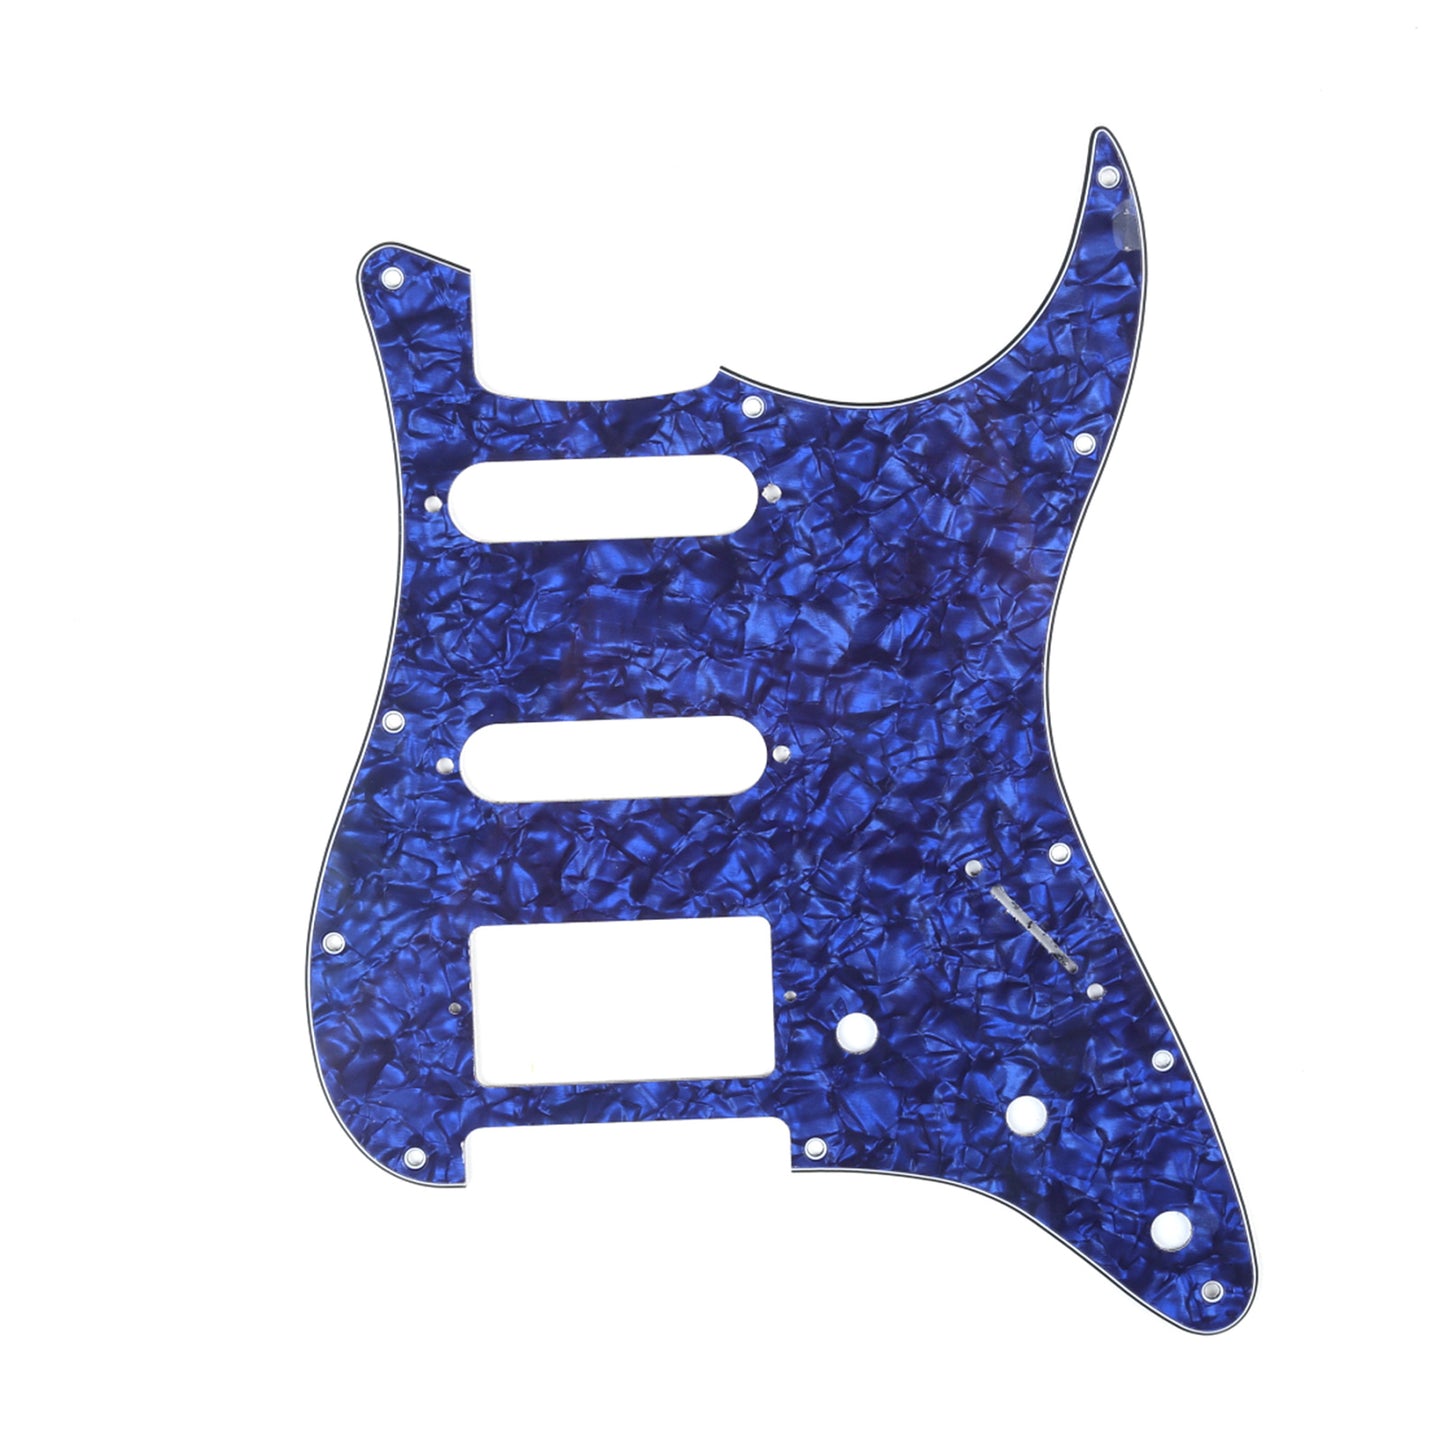 Musiclily HSS 11 Hole Guitar Strat Pickguard for Fender USA/Mexican Made Standard Stratocaster Modern Style, 4Ply Blue Pearl